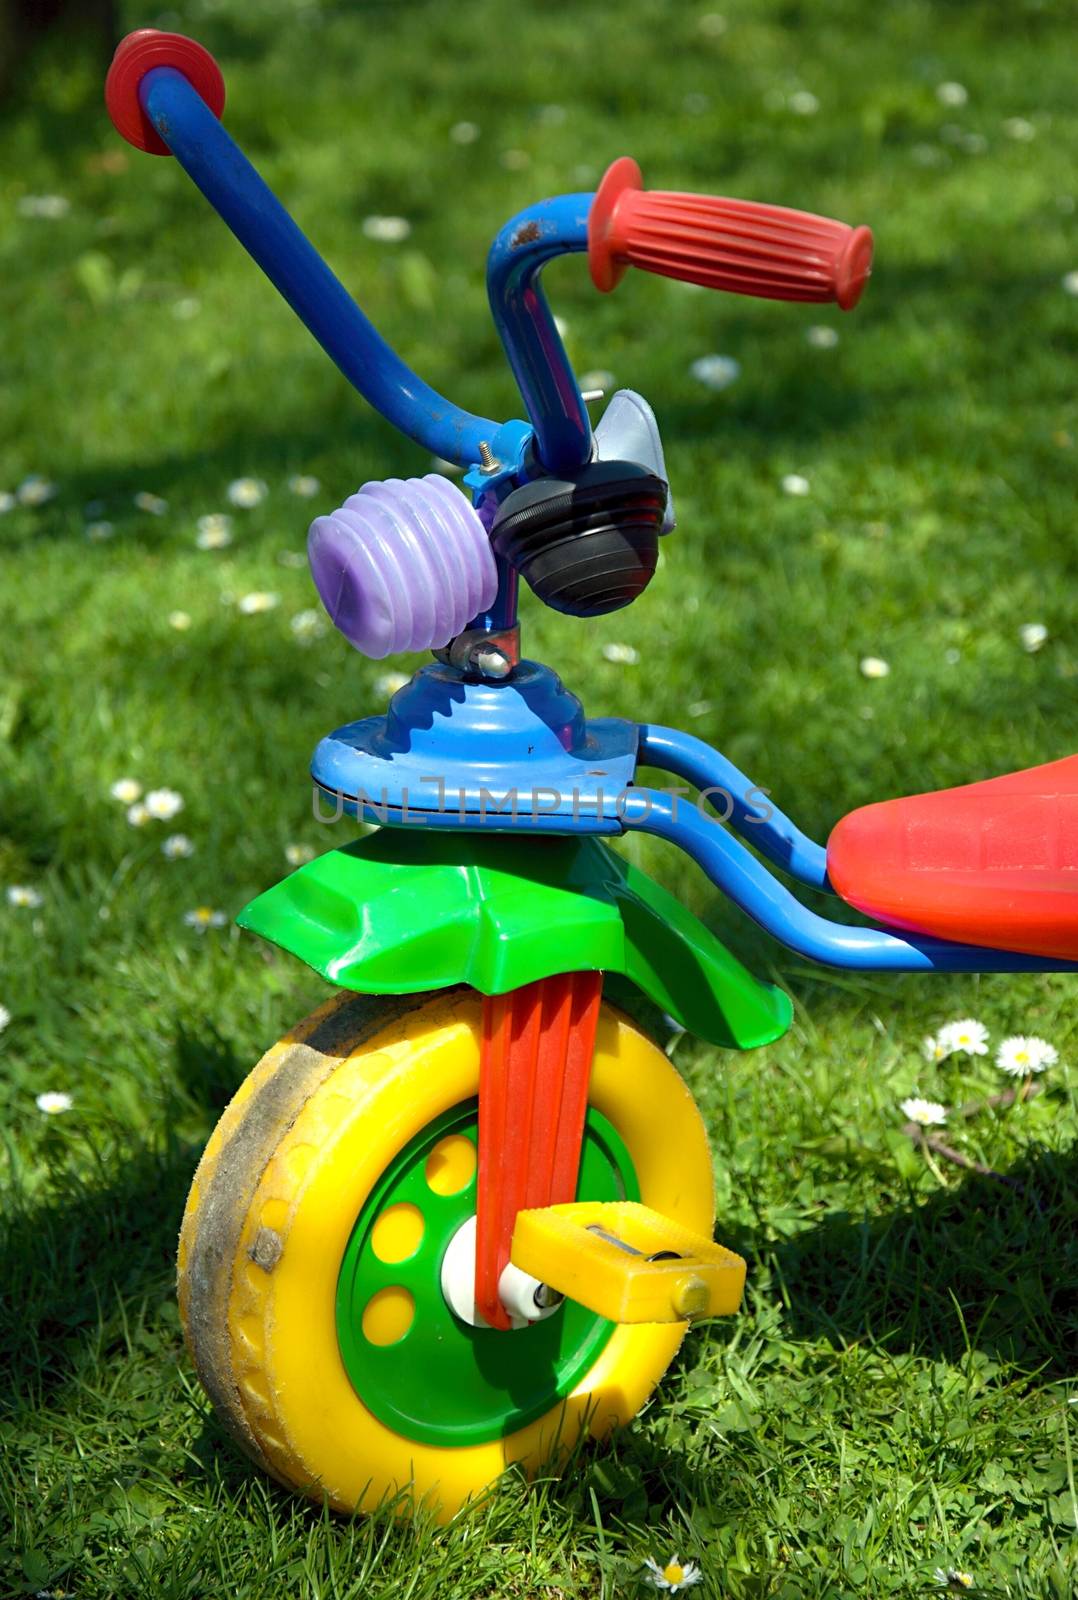 Tricycle in the garden.